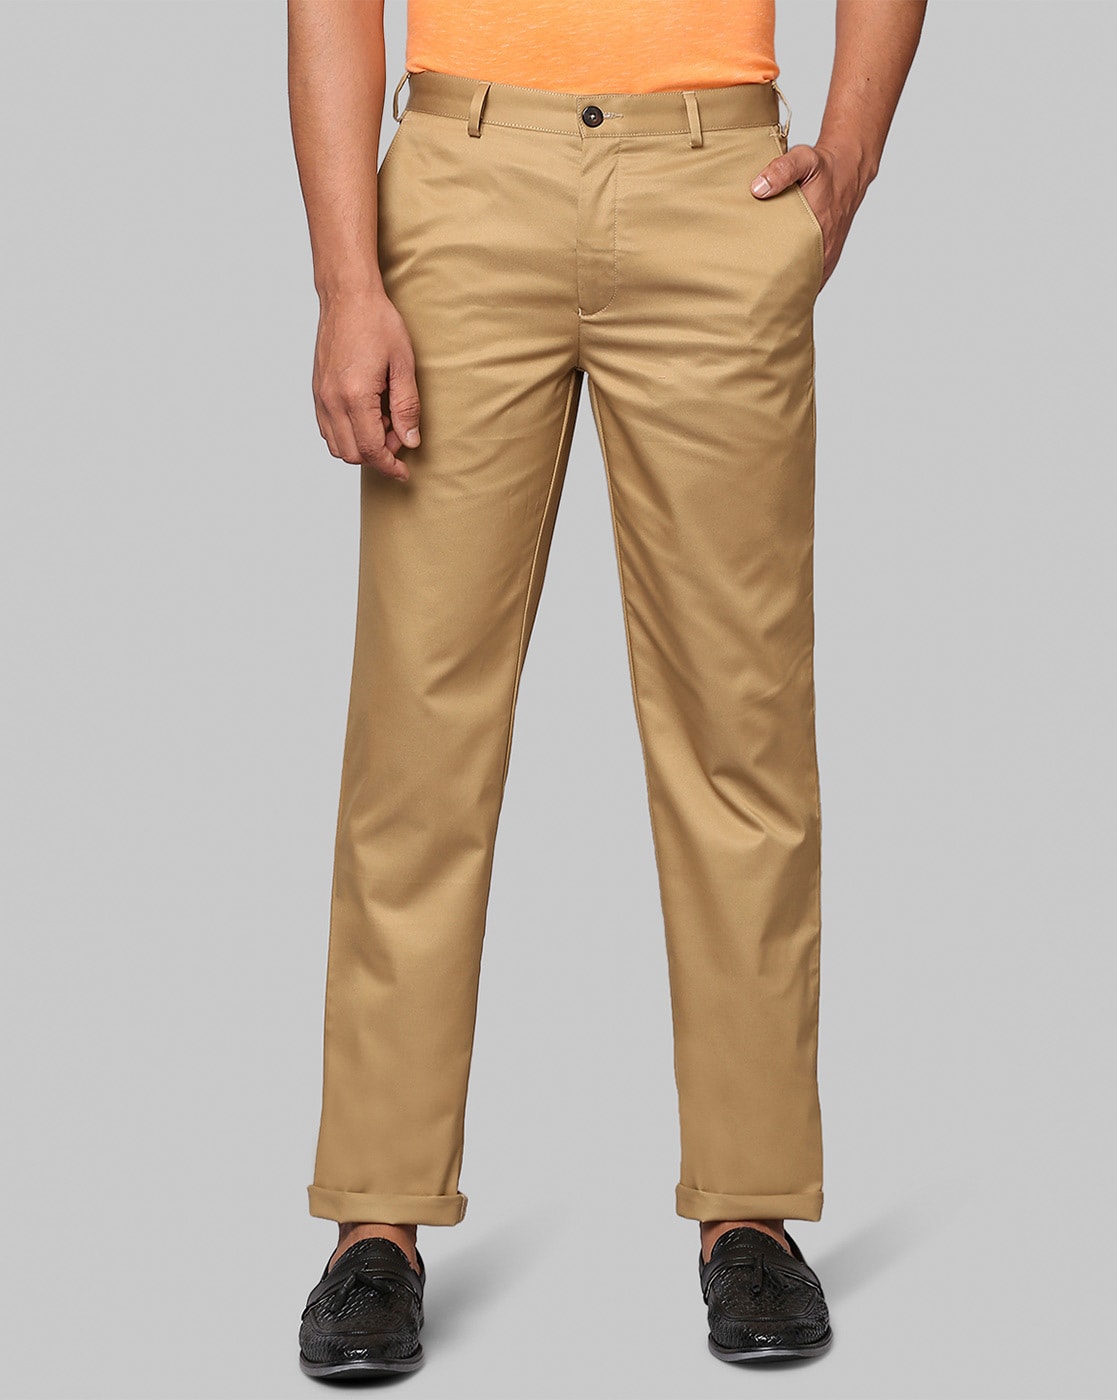 Giant Chinos Are Big Money: 17 Big, Beautiful Pants Worth Your Dollars  Right Now | GQ